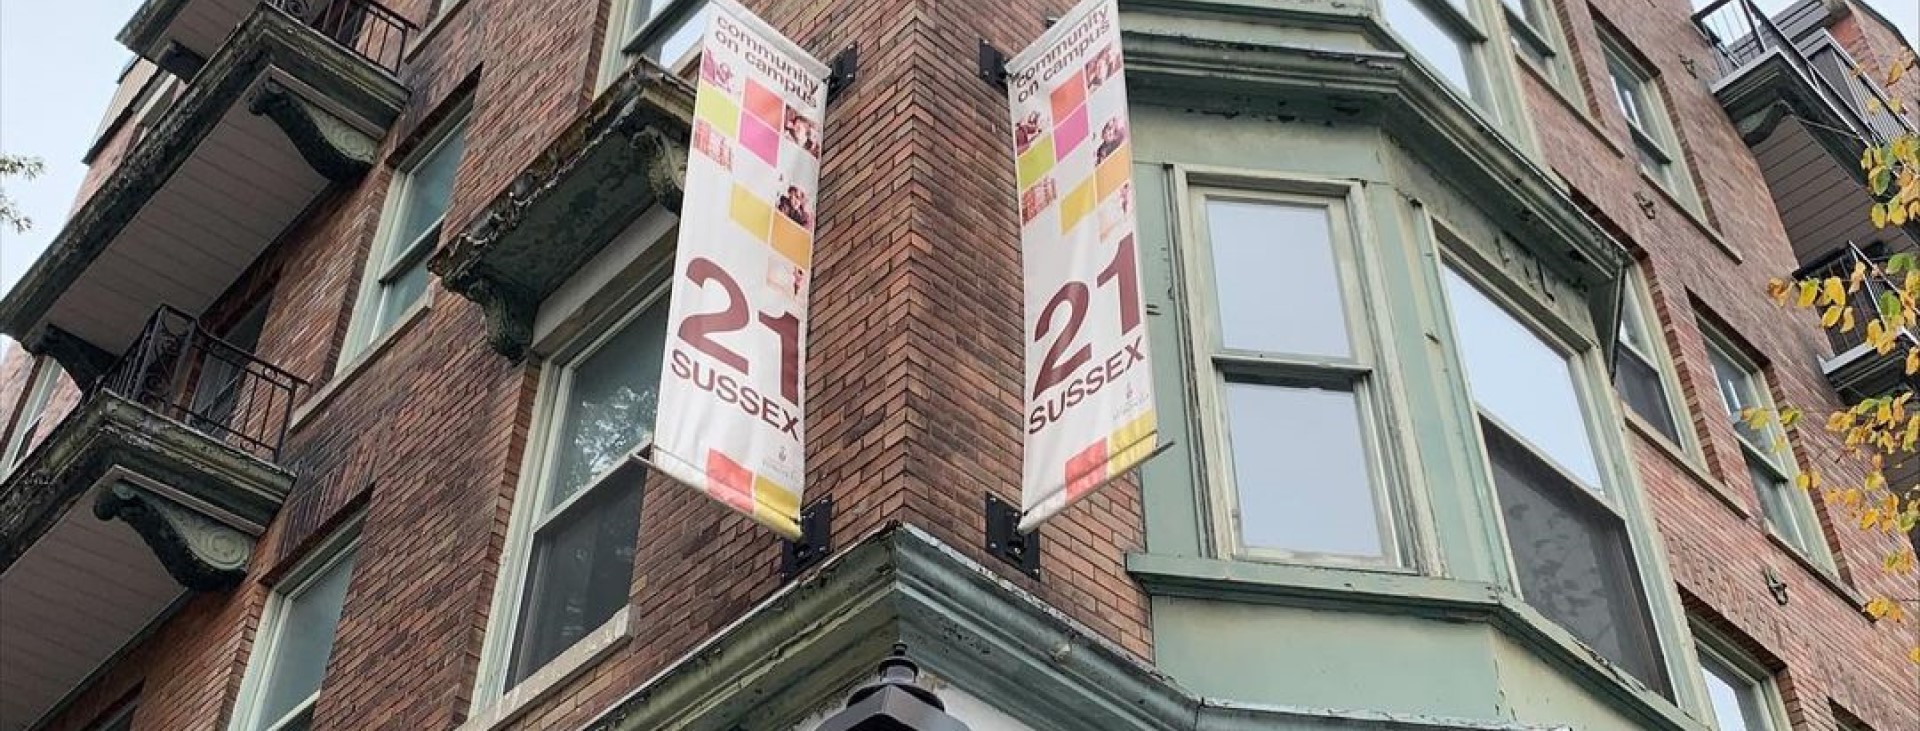 21 Sussex banners outside the building.